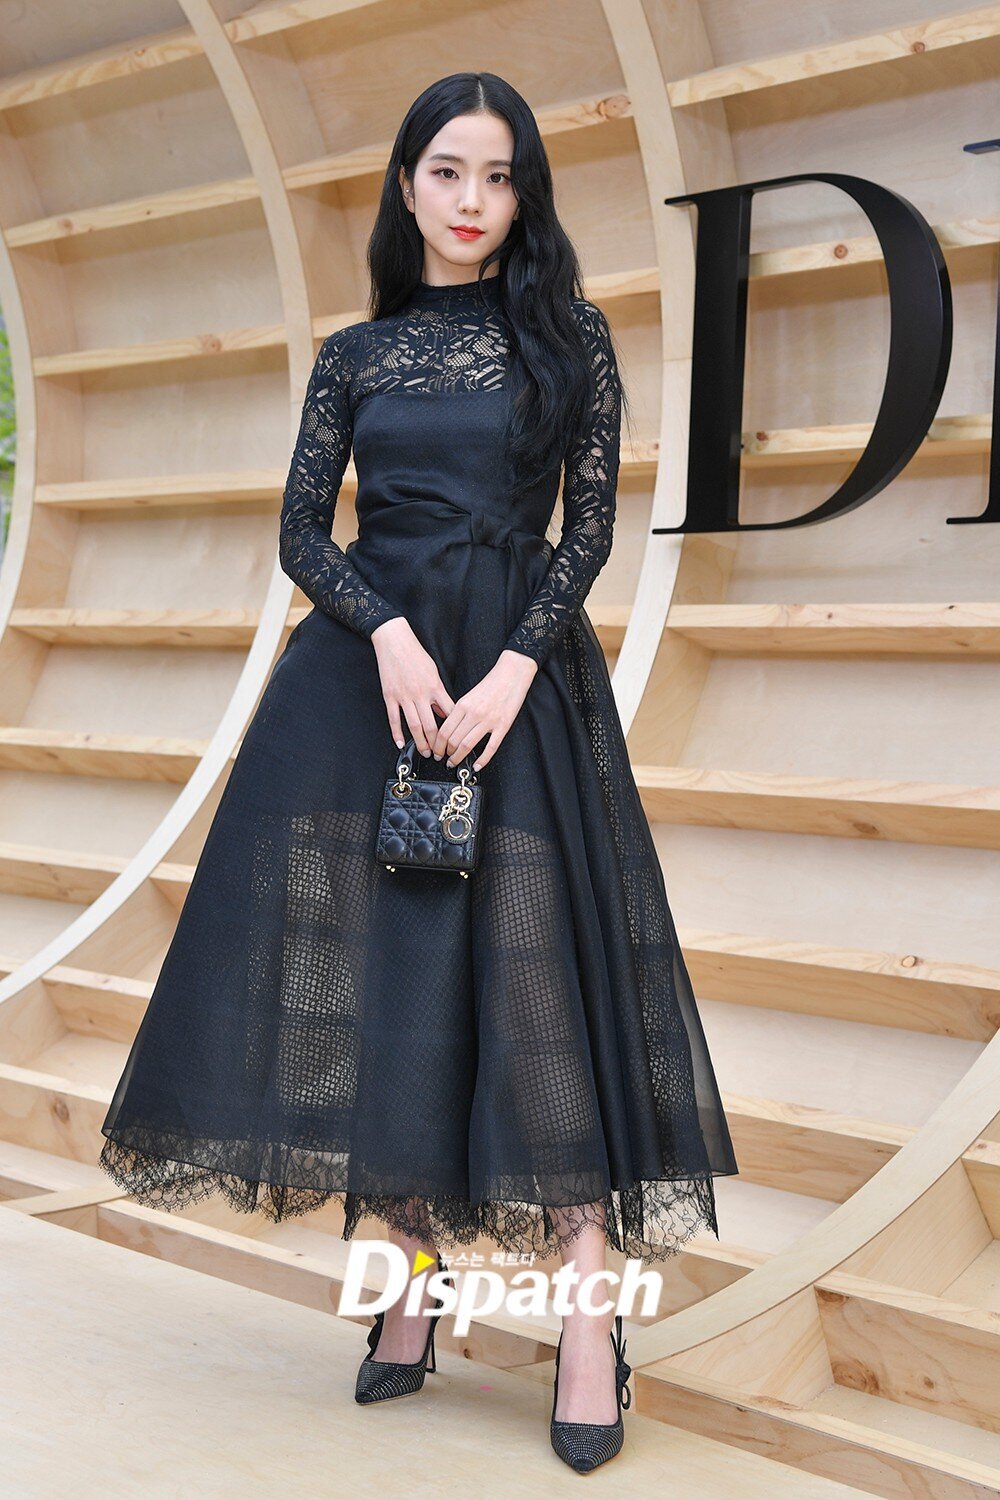 Blackpink's Jisoo Goes Sheer in Dior Look at Couture Fashion Show